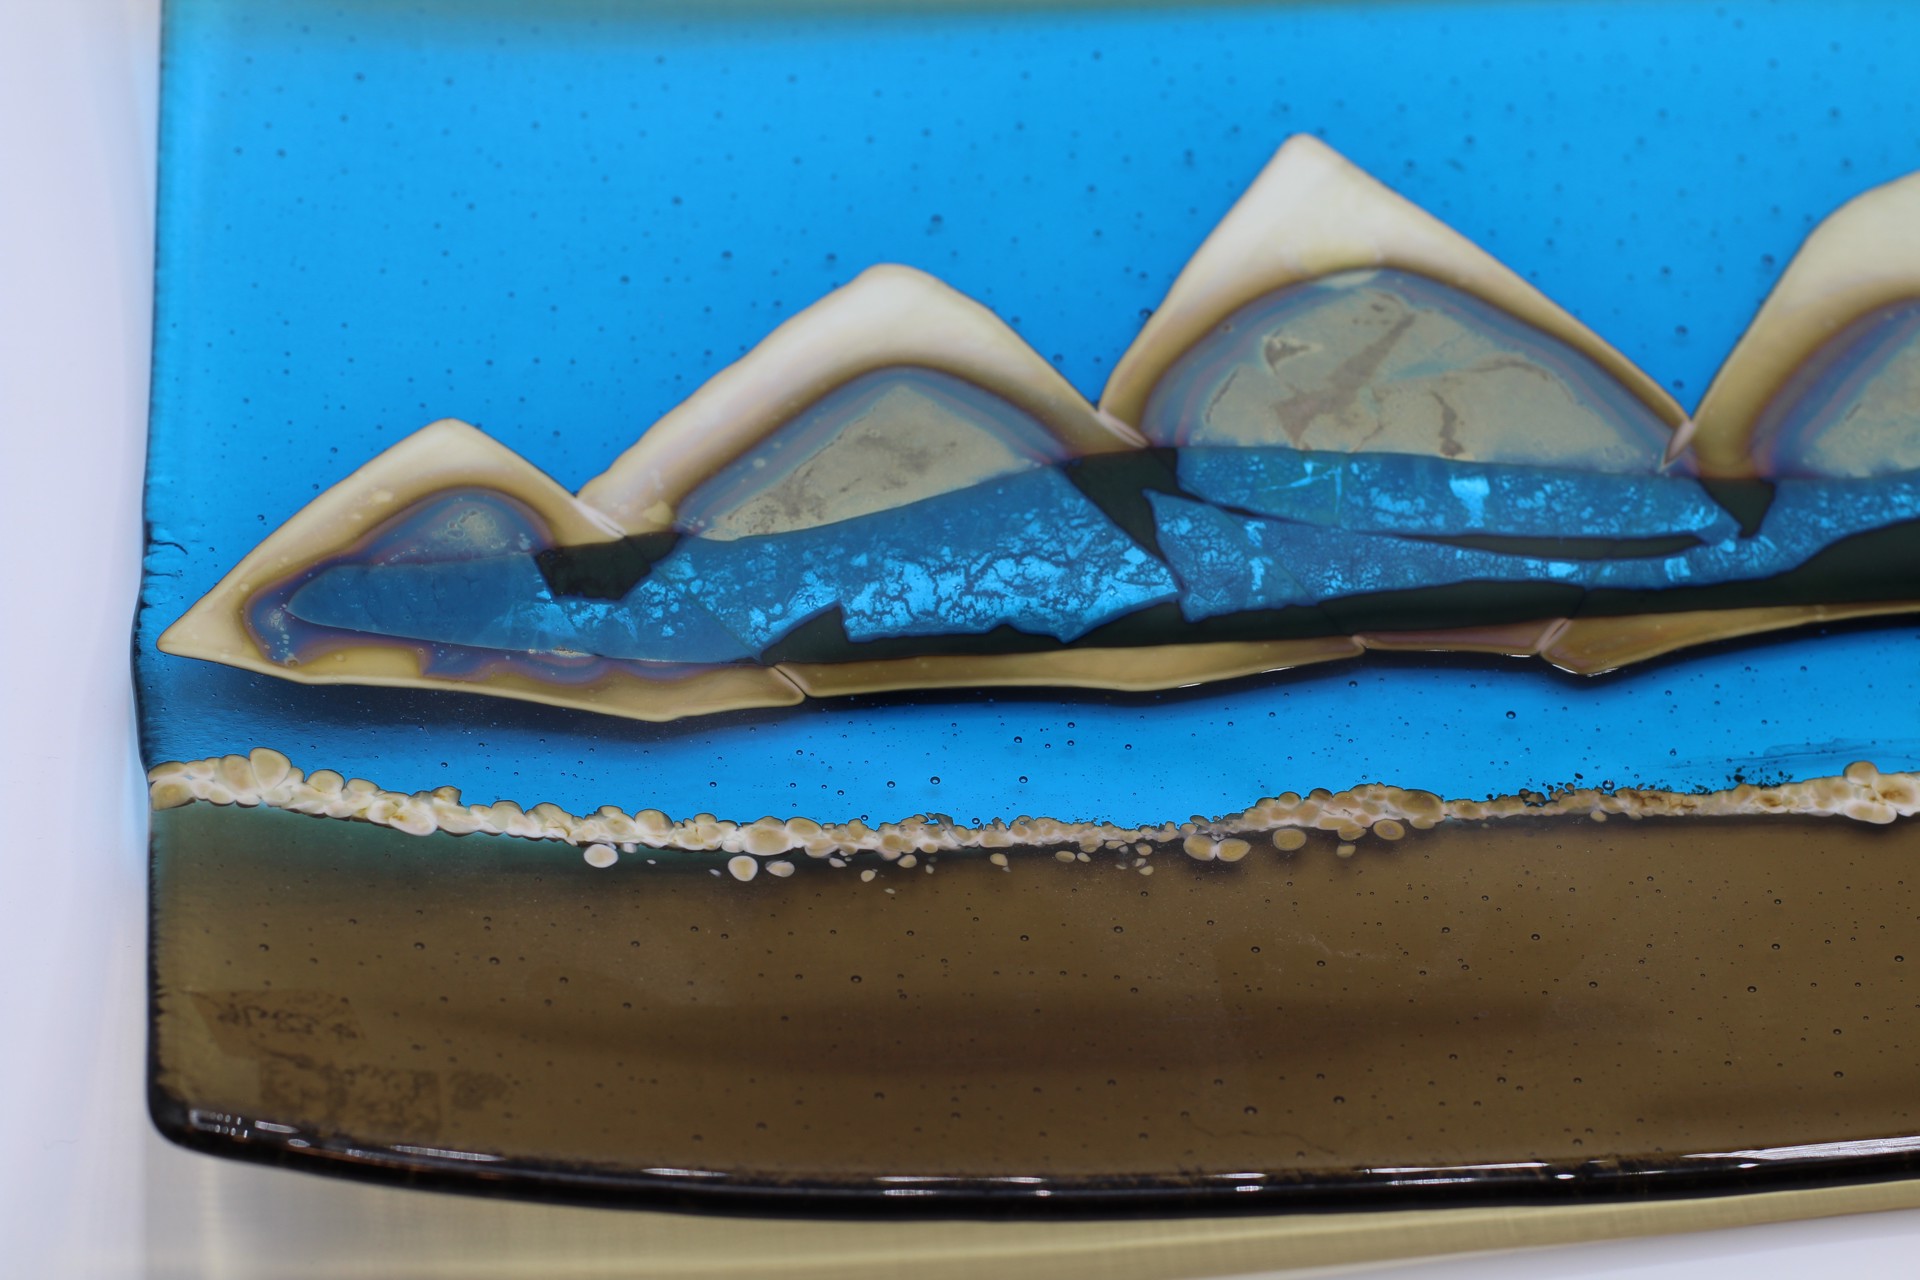 Mountain Scape Platter (12x17) by Kathy Burk